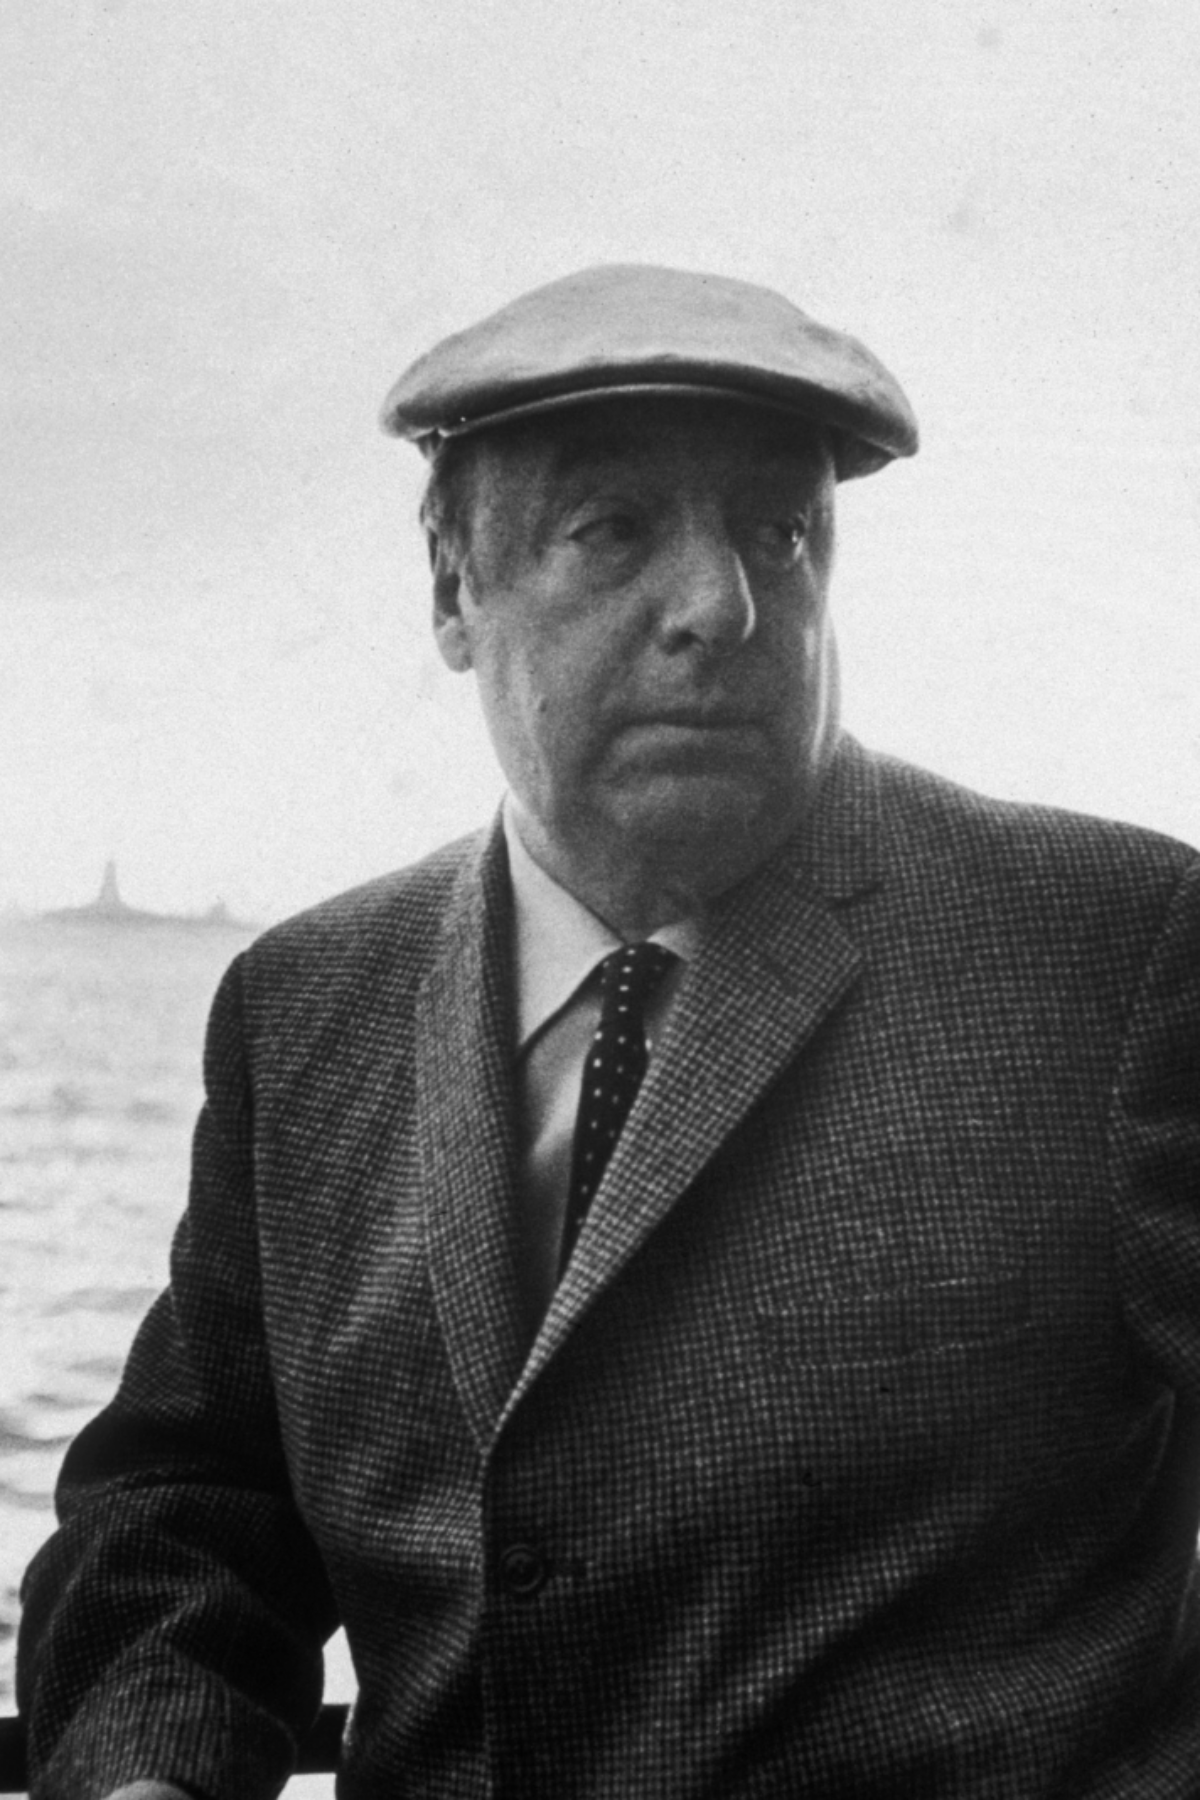 13th June 1966: EXCLUSIVE Chilean poet and activist Pablo Neruda (1904 - 1973) leans on a ship's railing during the 34th annual PEN boat ride around New York City. He wears a cap. (Photo by Sam Falk/New York Times Co./Getty Images)